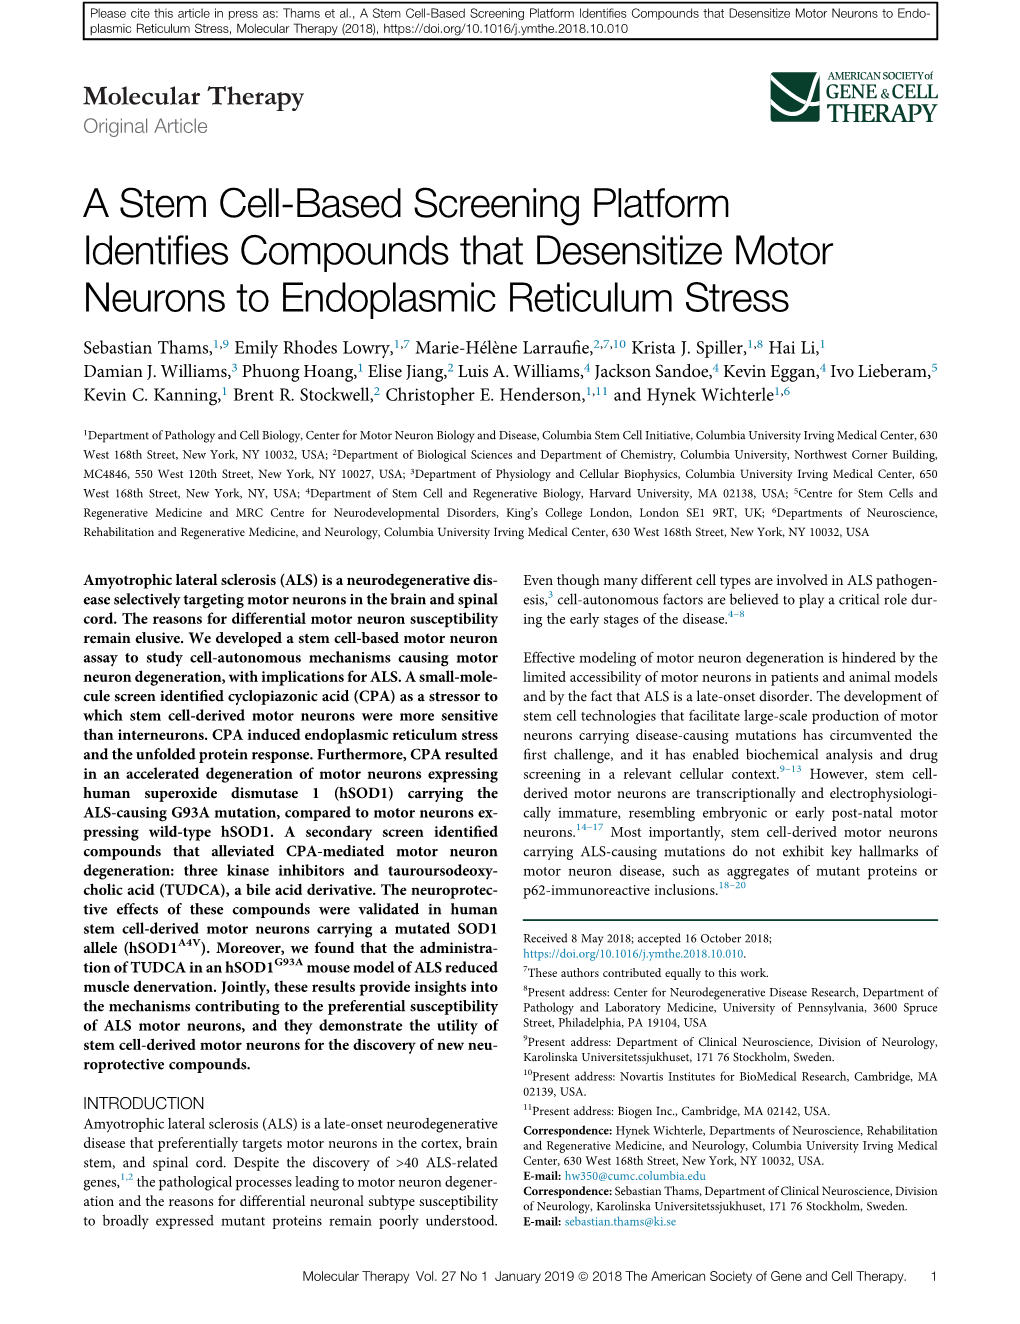 A Stem Cell-Based Screening Platform Identifies Compounds That